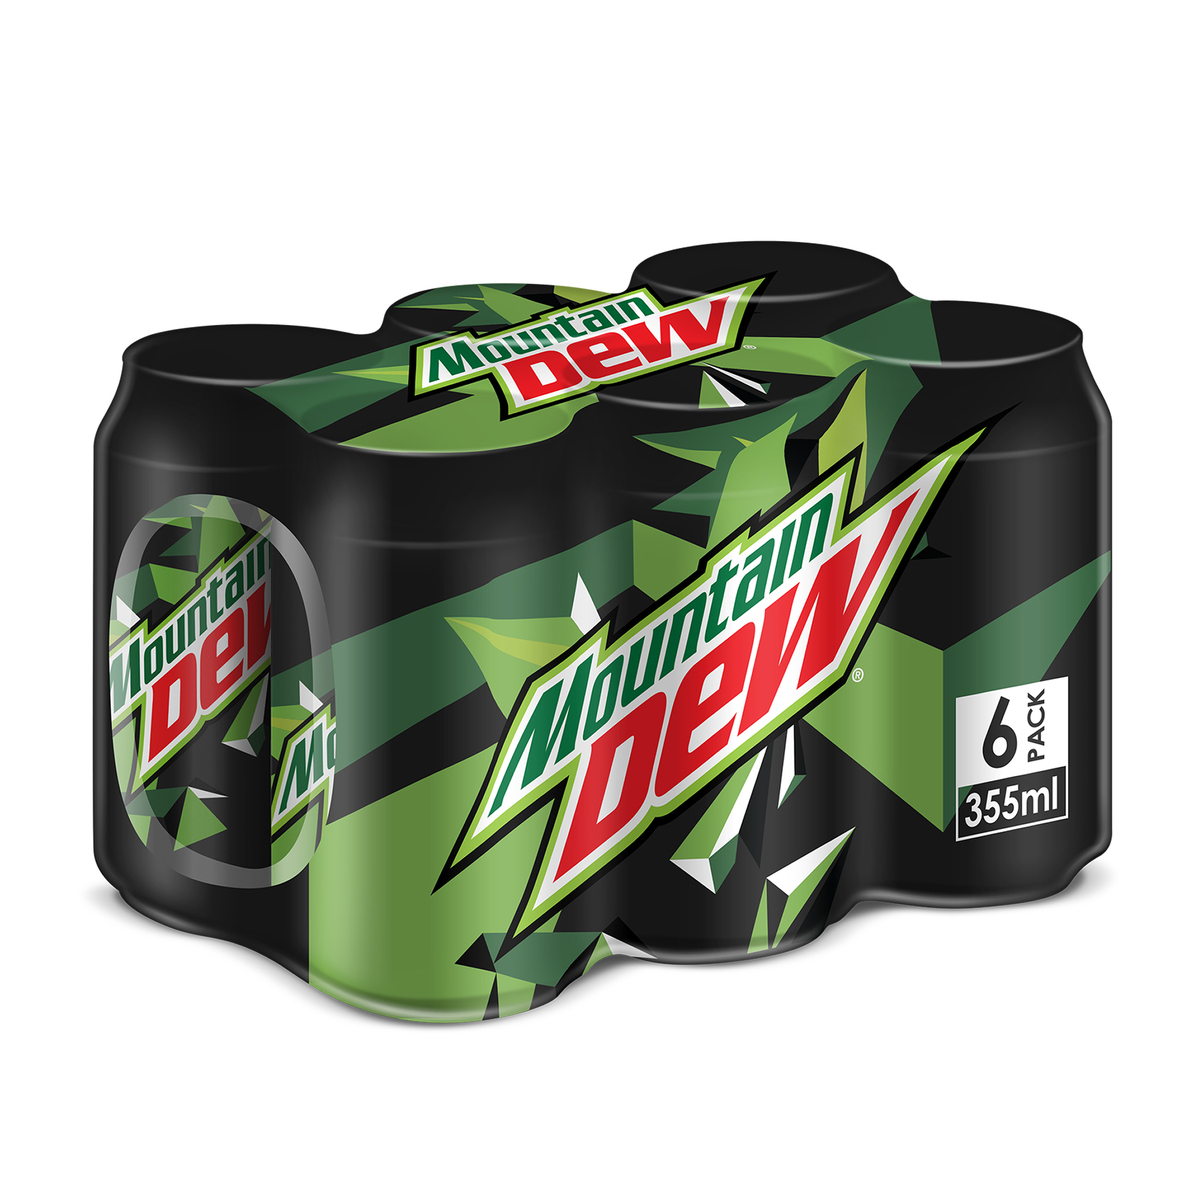 Mountain Dew Carbonated Soft Drink Can 18 x 355 ml